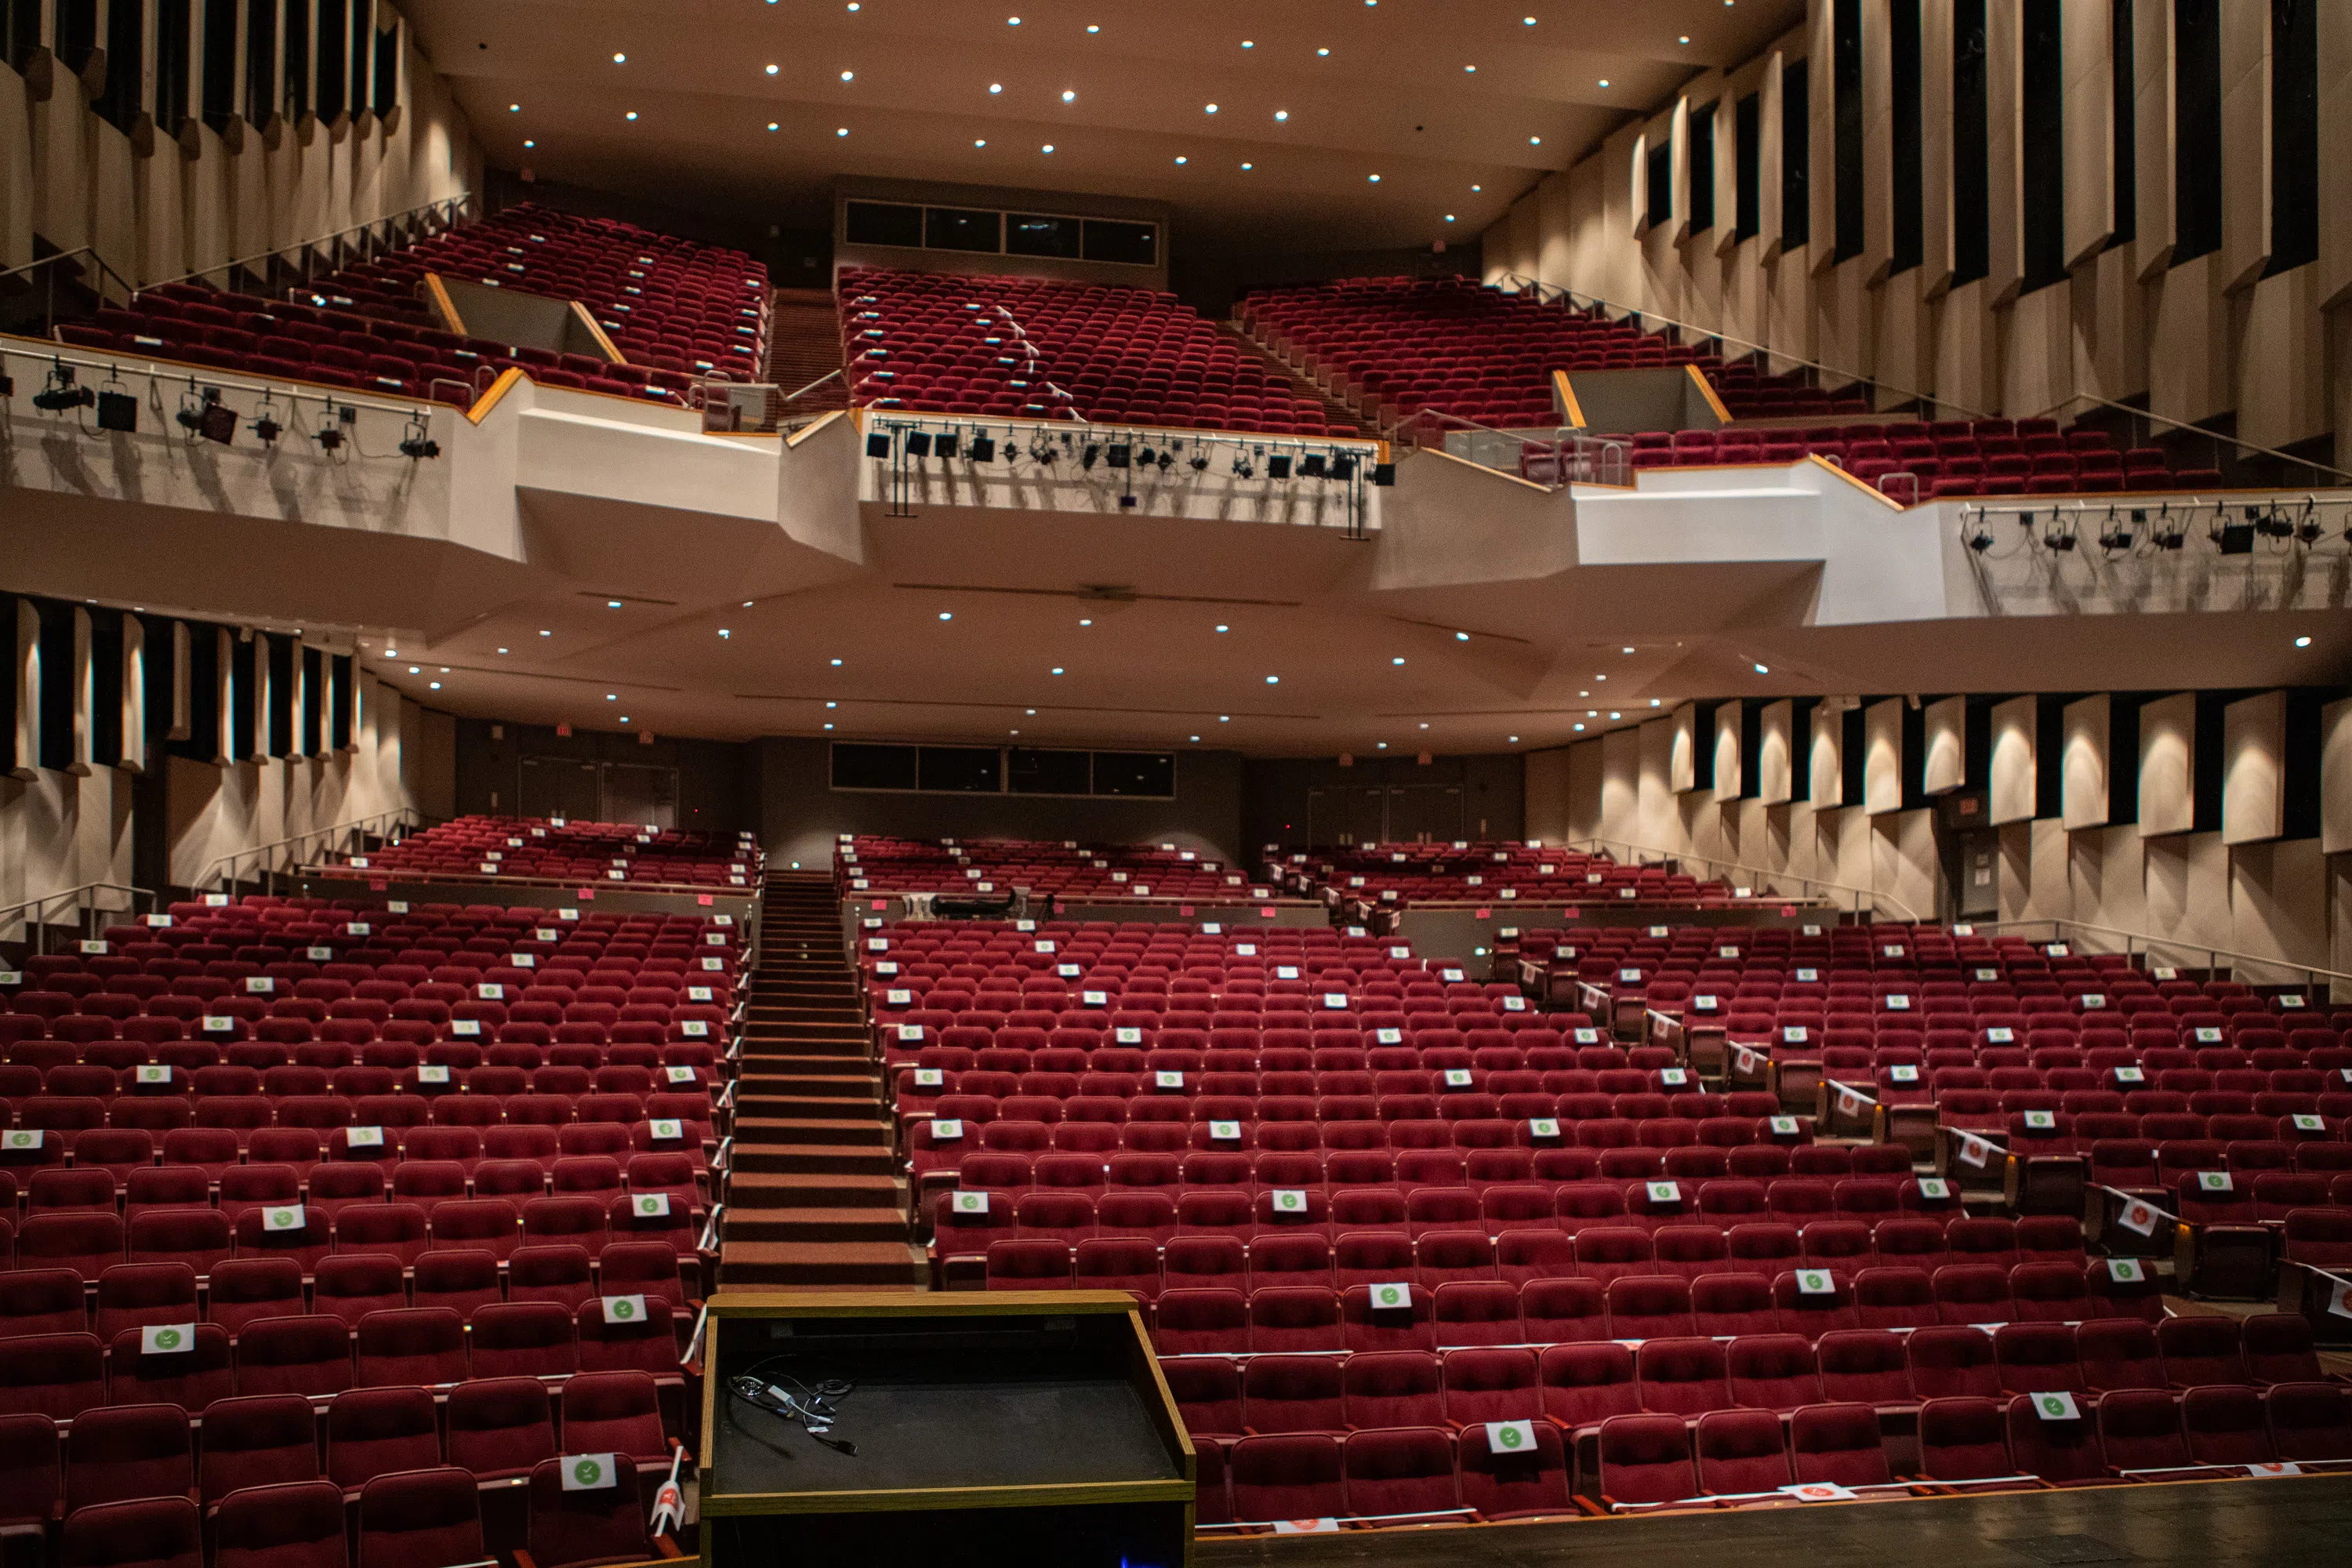 Photo of the seating within UB's Main Theater in the CFA.